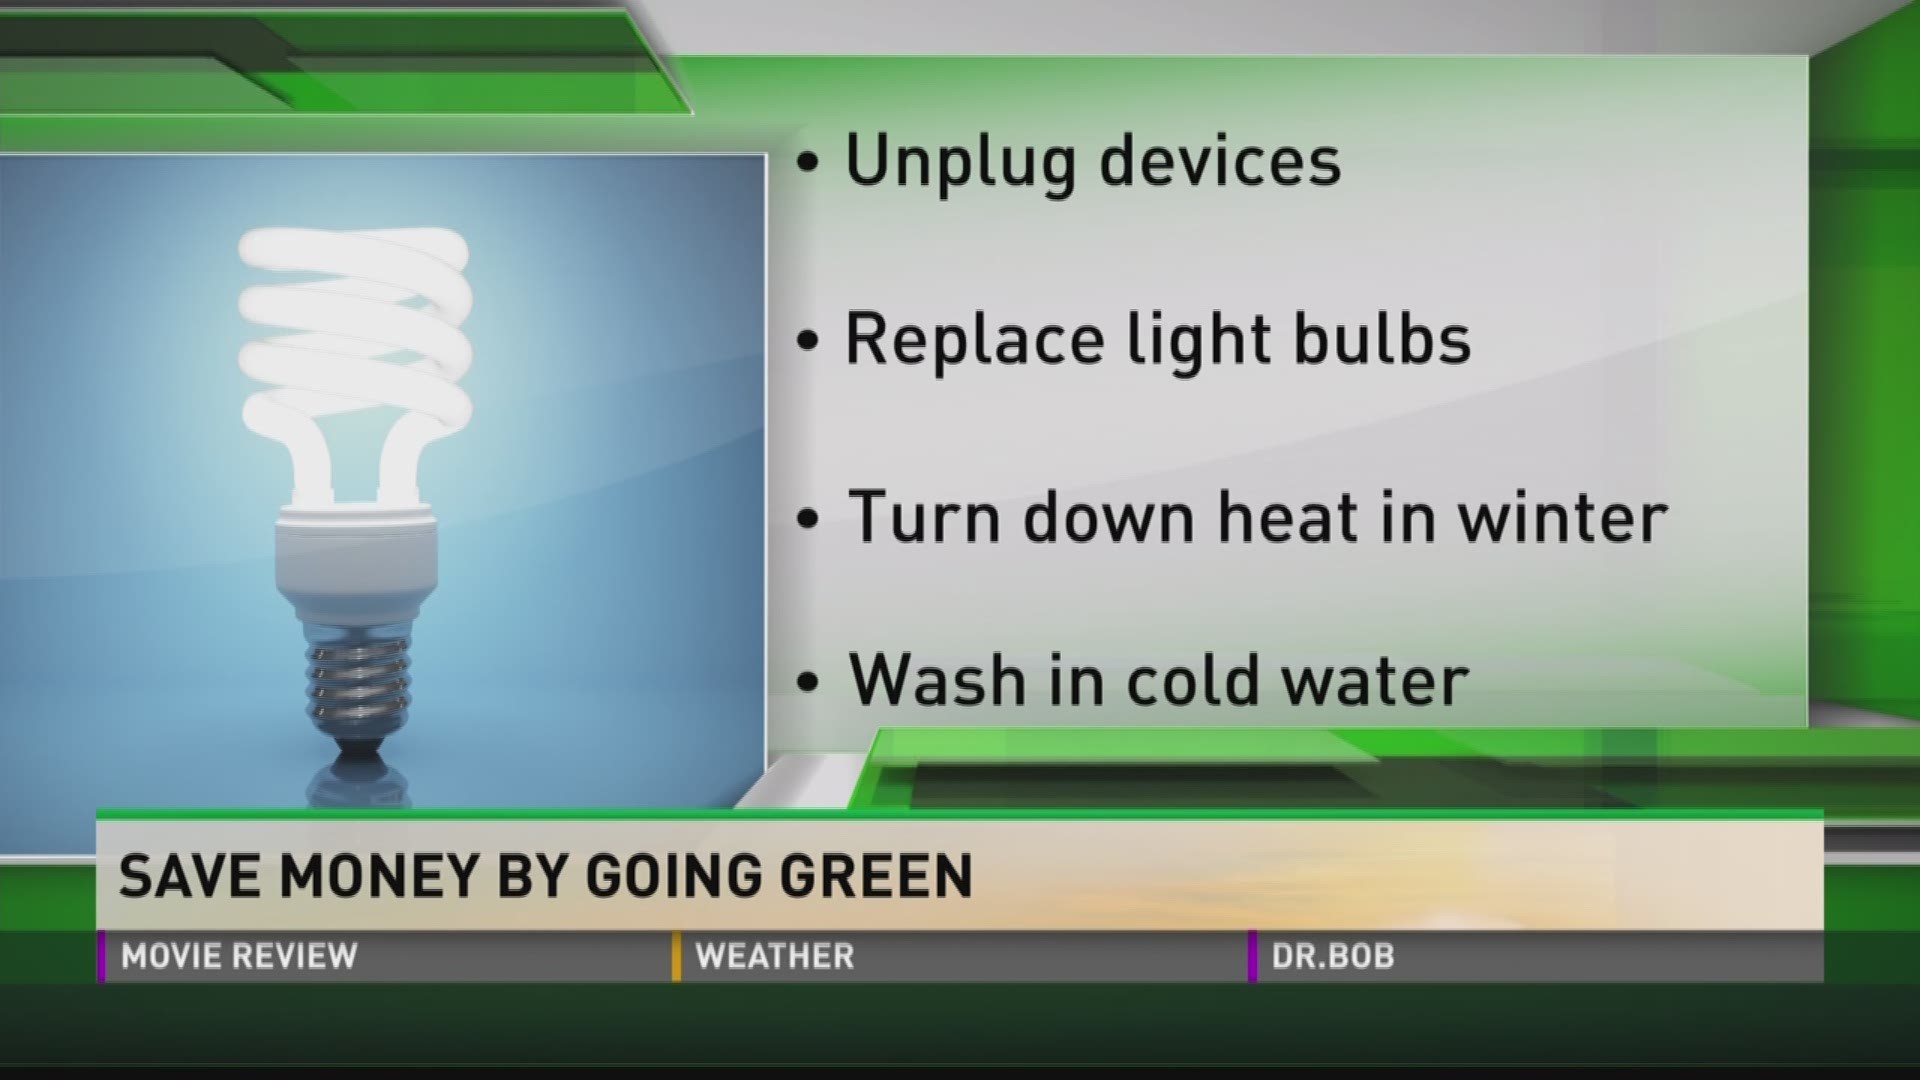 Certified financial planner, Paul Fain, stops by to discuss going green to save some dollars.